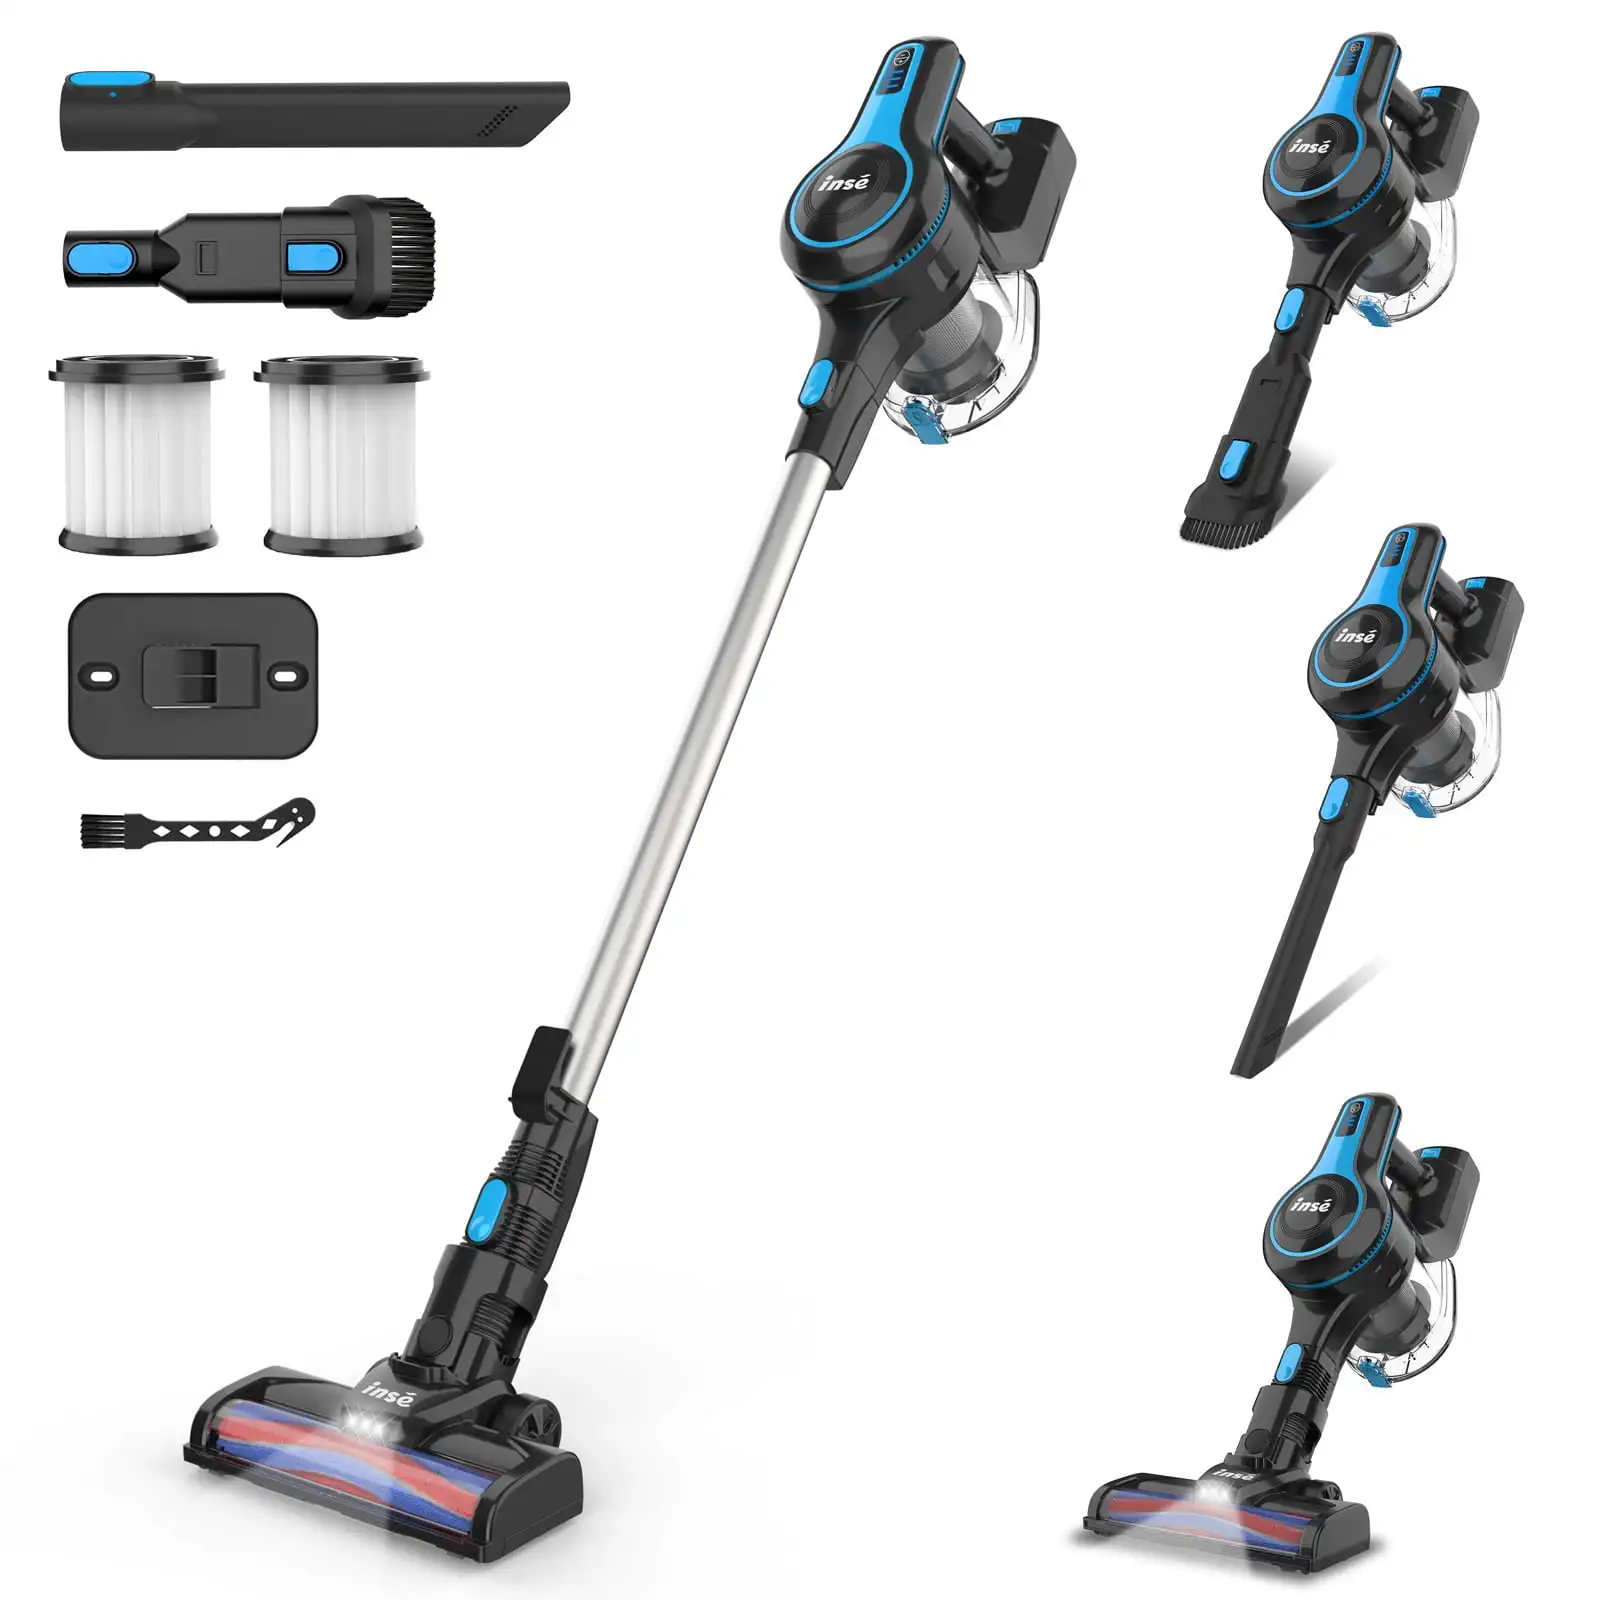 

Cordless Vacuum Cleaner, 6 in 1 Powerful Suction Lightweight Stick Vacuum with 2200mAh Rechargeable Battery, up to 45min Runtime